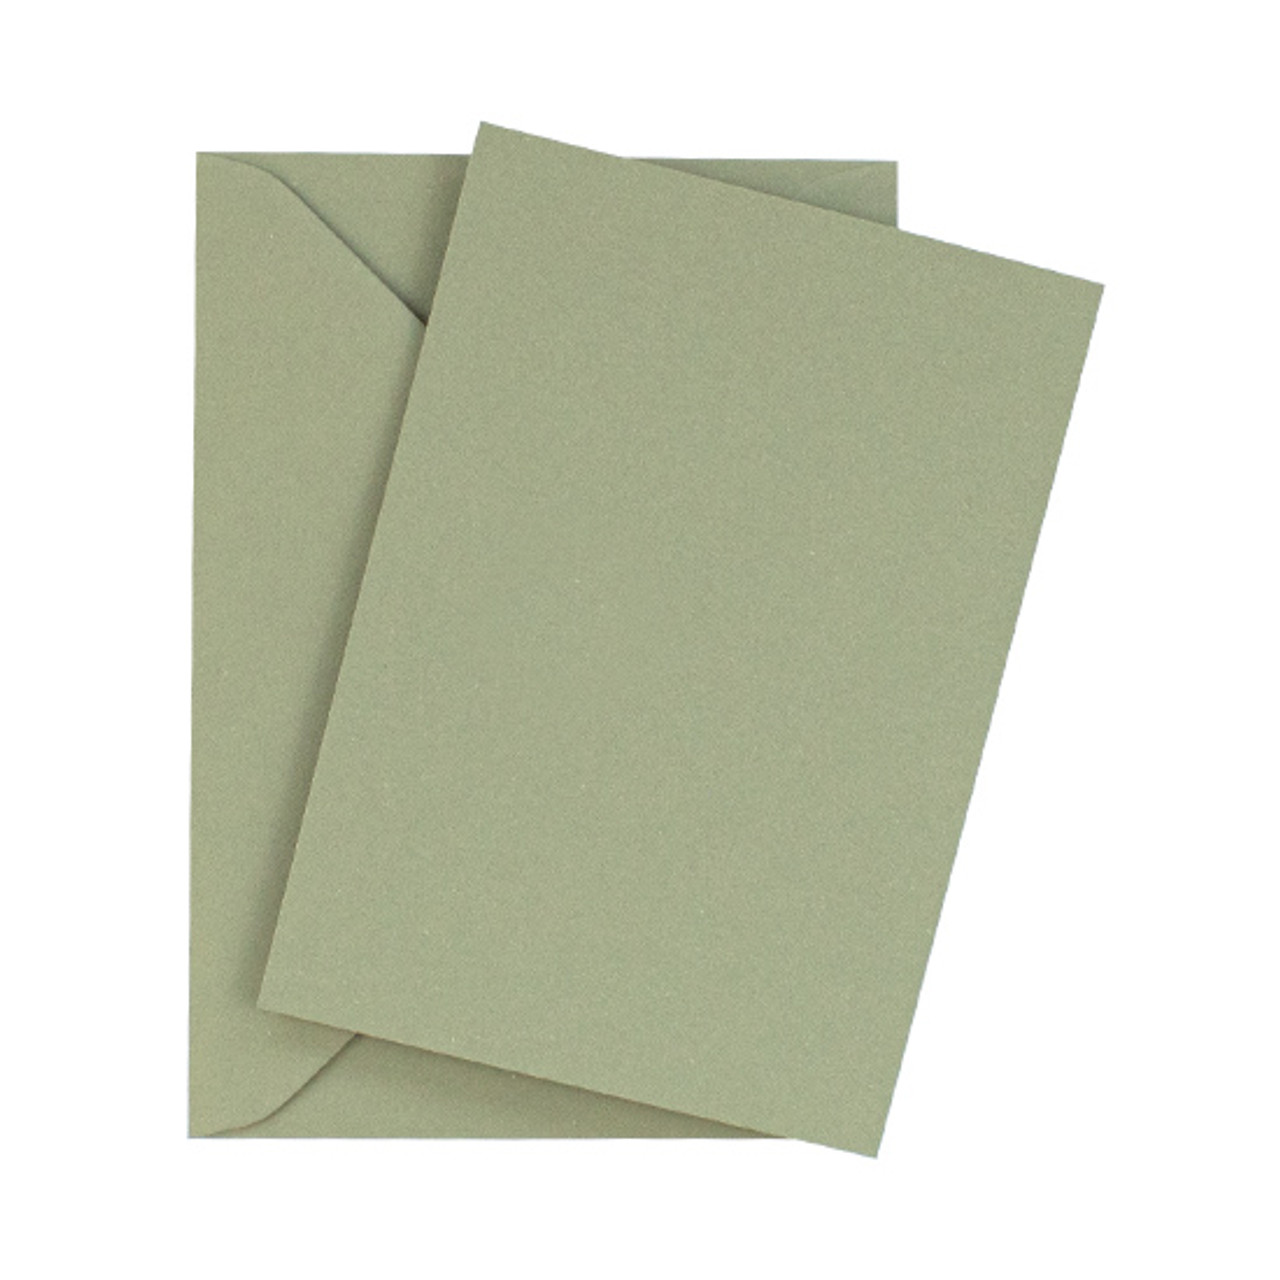 5 x 7 Moss Green Postcard Blanks with Envelopes